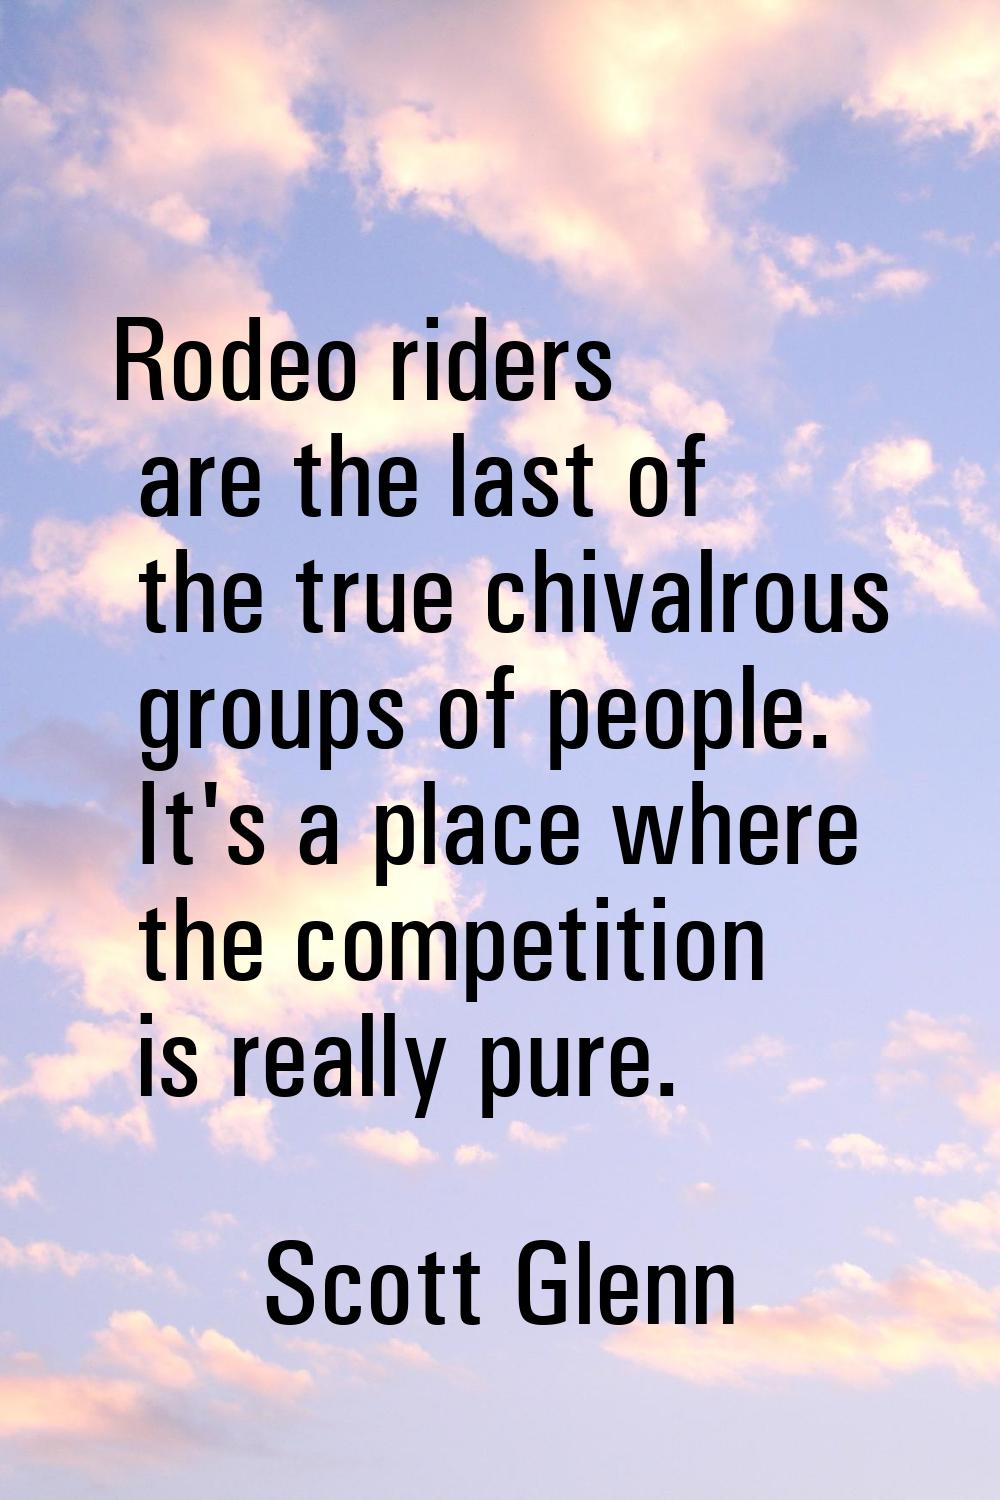 Rodeo riders are the last of the true chivalrous groups of people. It's a place where the competiti